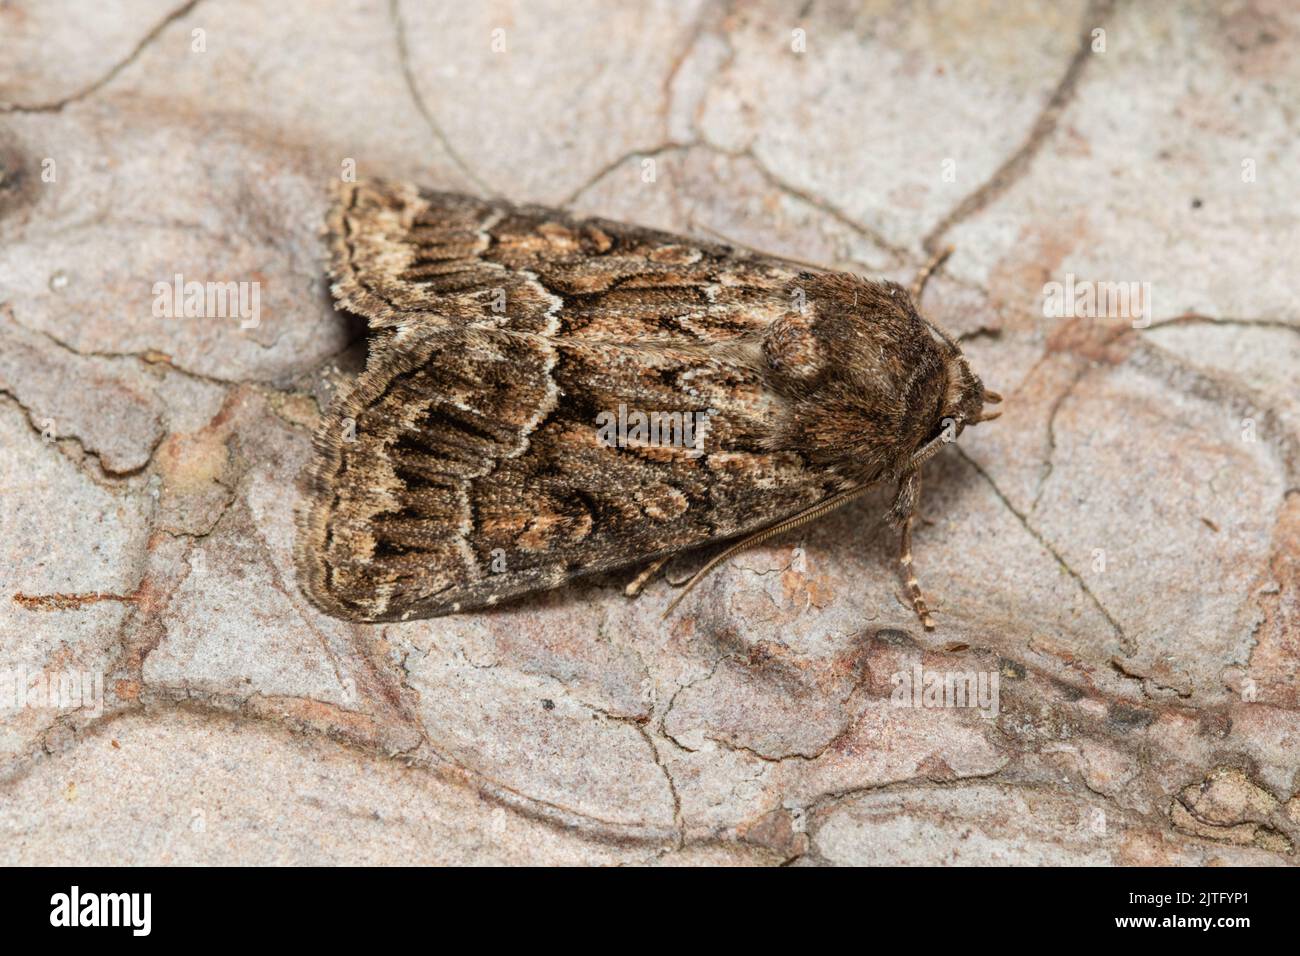 A Copper Underwing agg. moth, Amphipyra pyramidea, also known as humped green fruitworm or pyramidal green fruitworm resting on the bark of a tree. Stock Photo